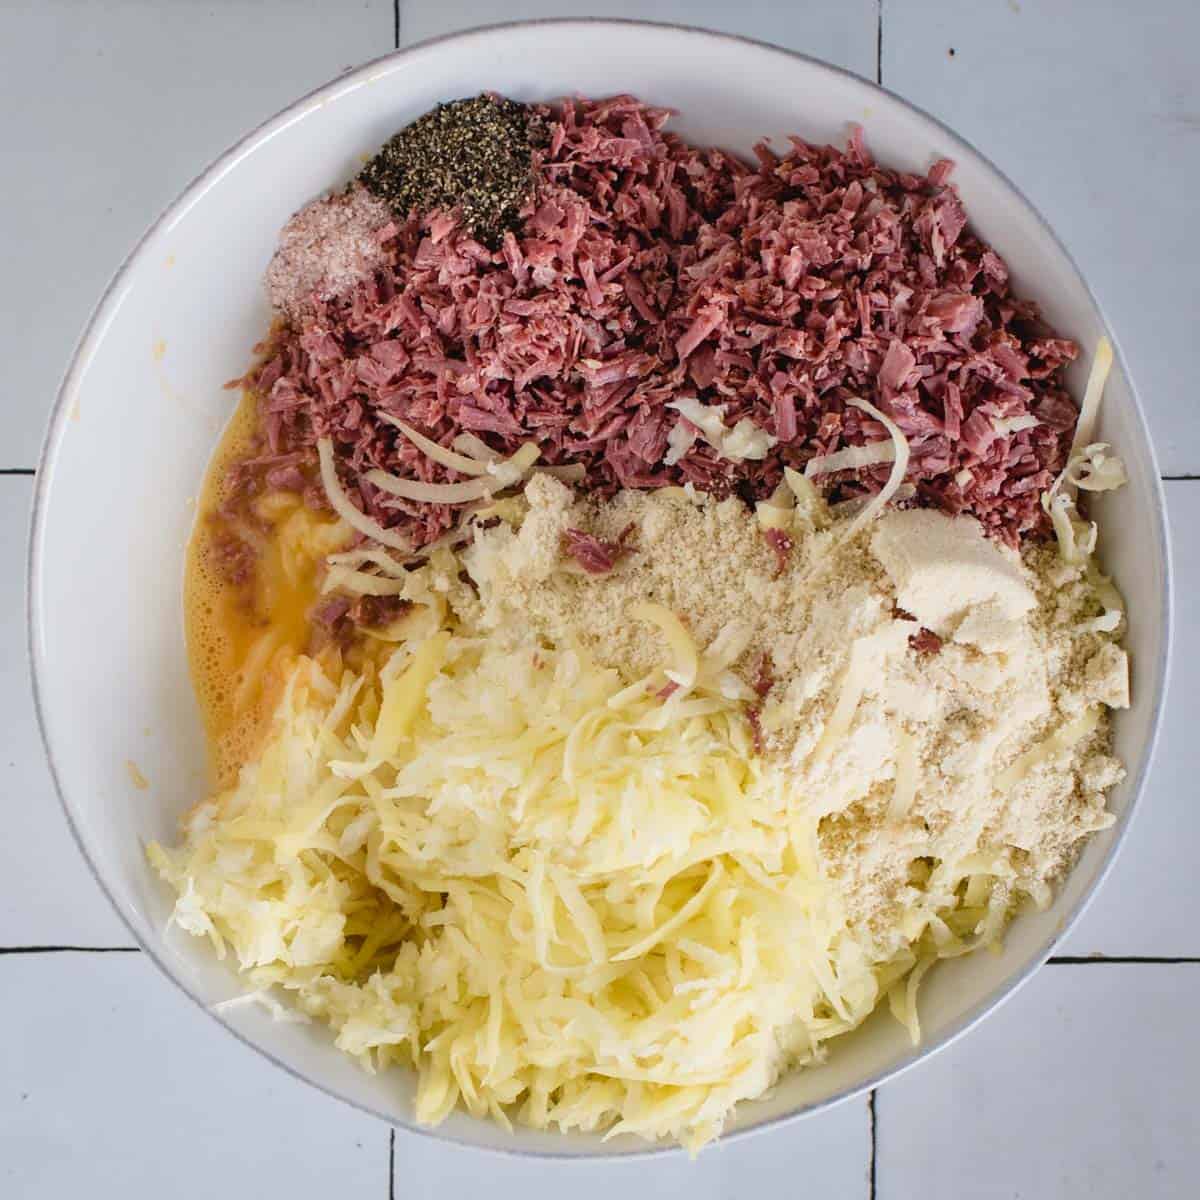 Bowl with corned beef, potato and other fritter ingredients before mixing